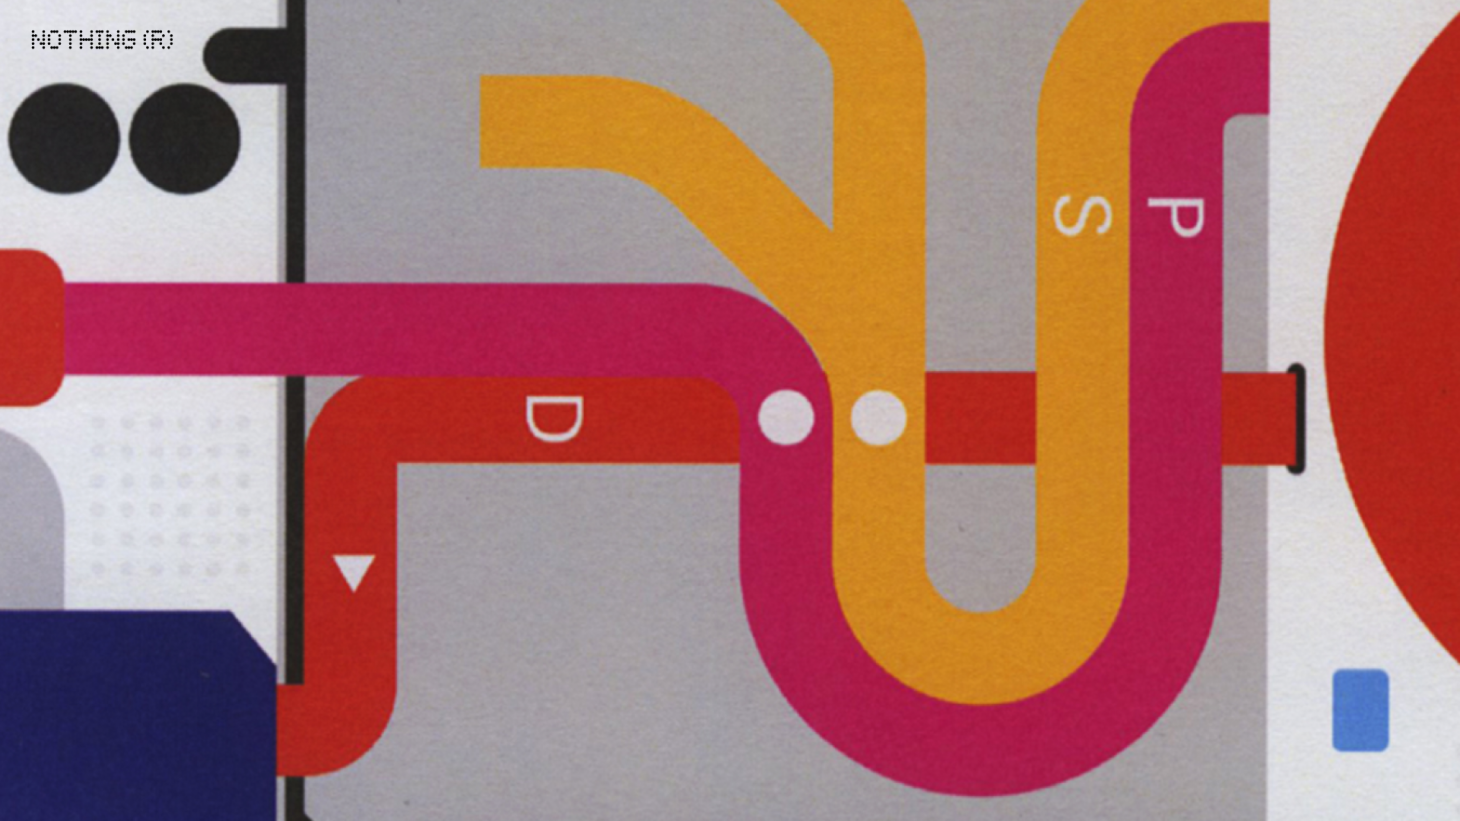 A subway map used as an illustration for Nothing's design language